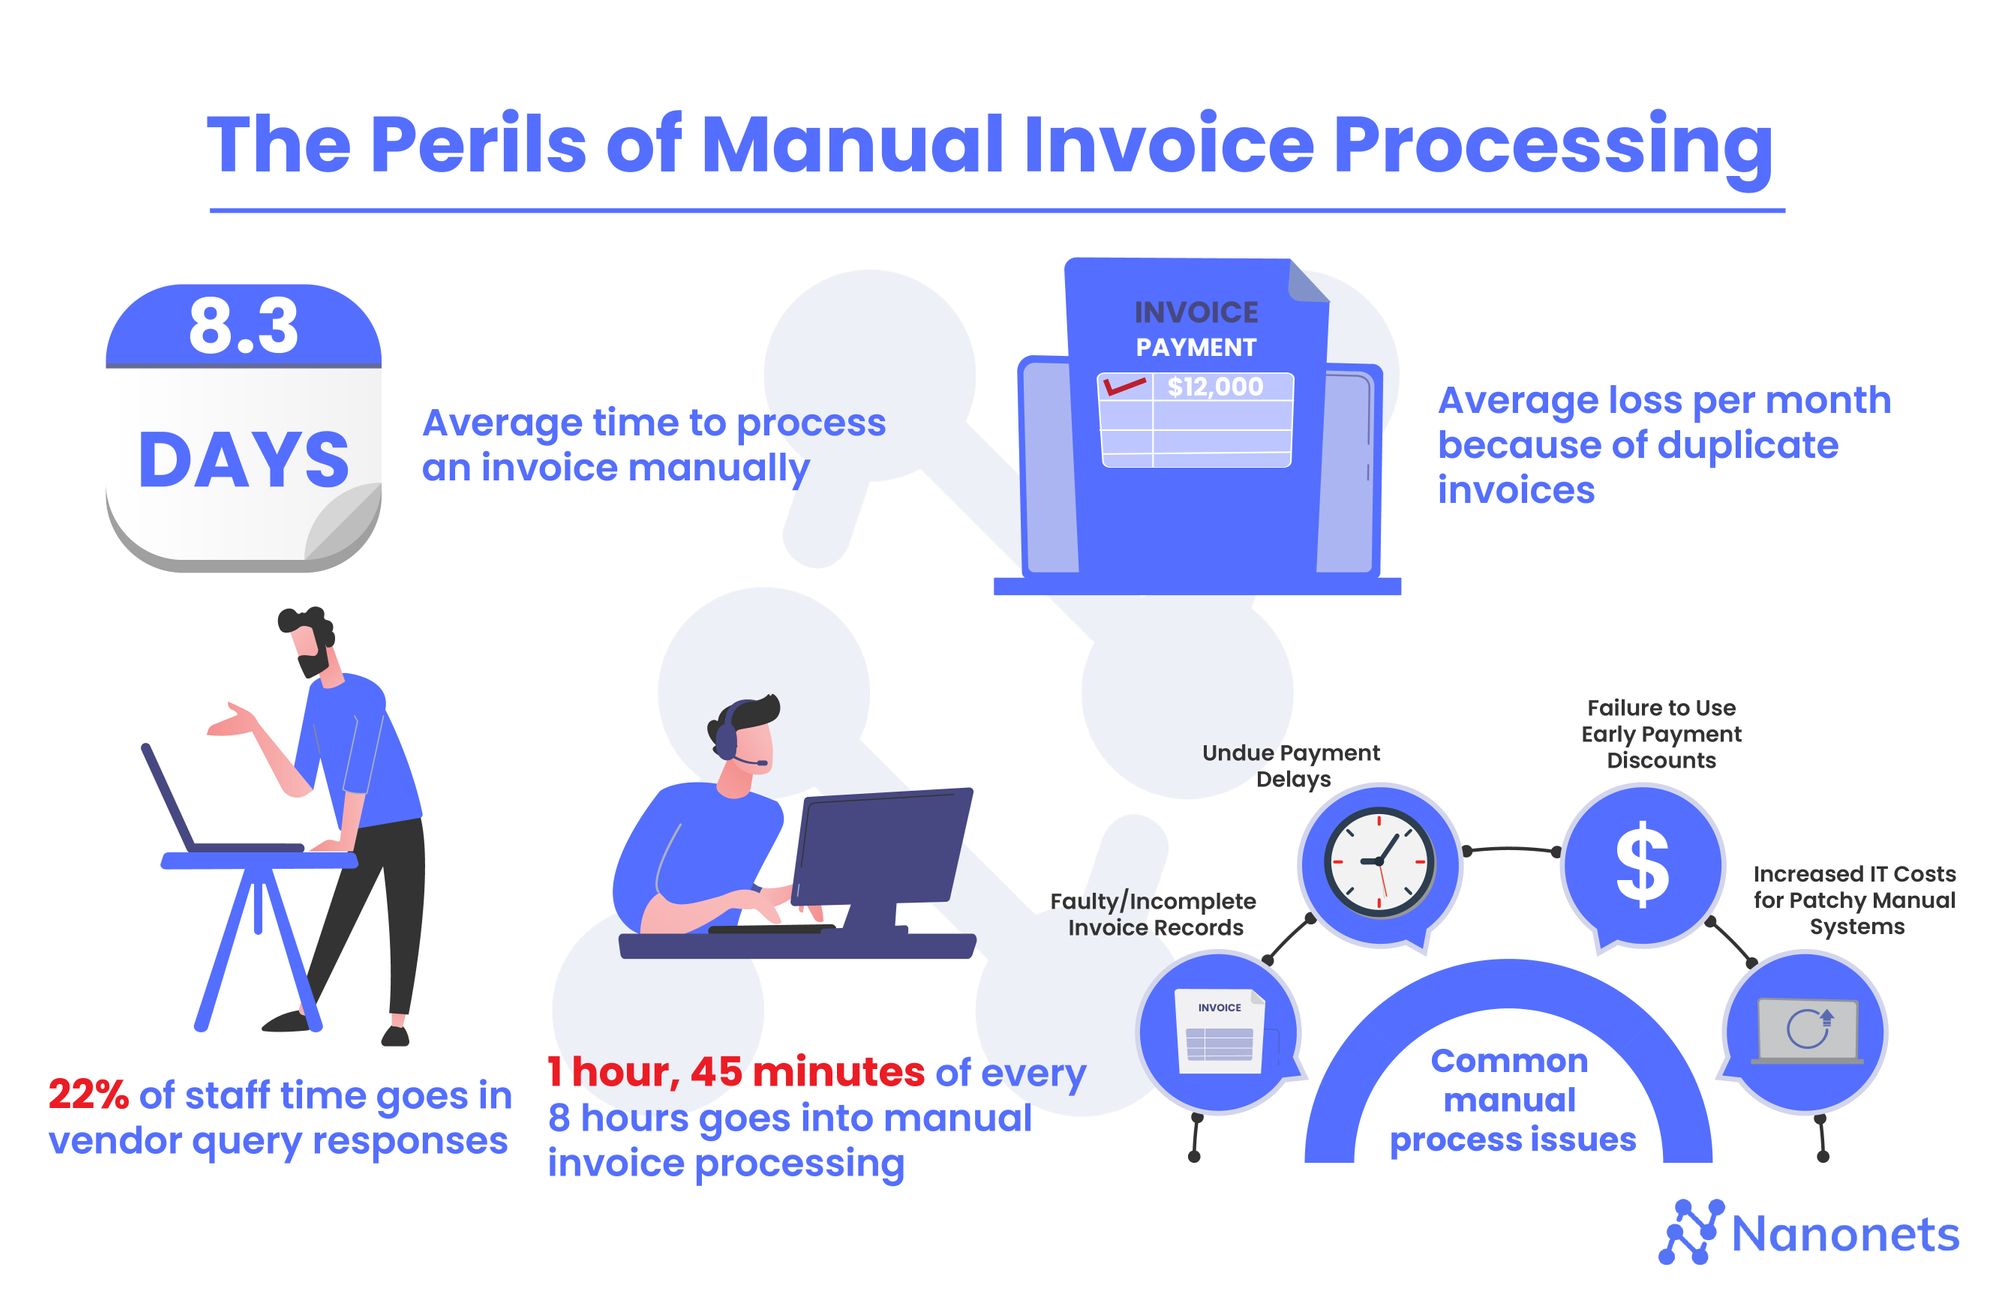 manual invoice processing woes